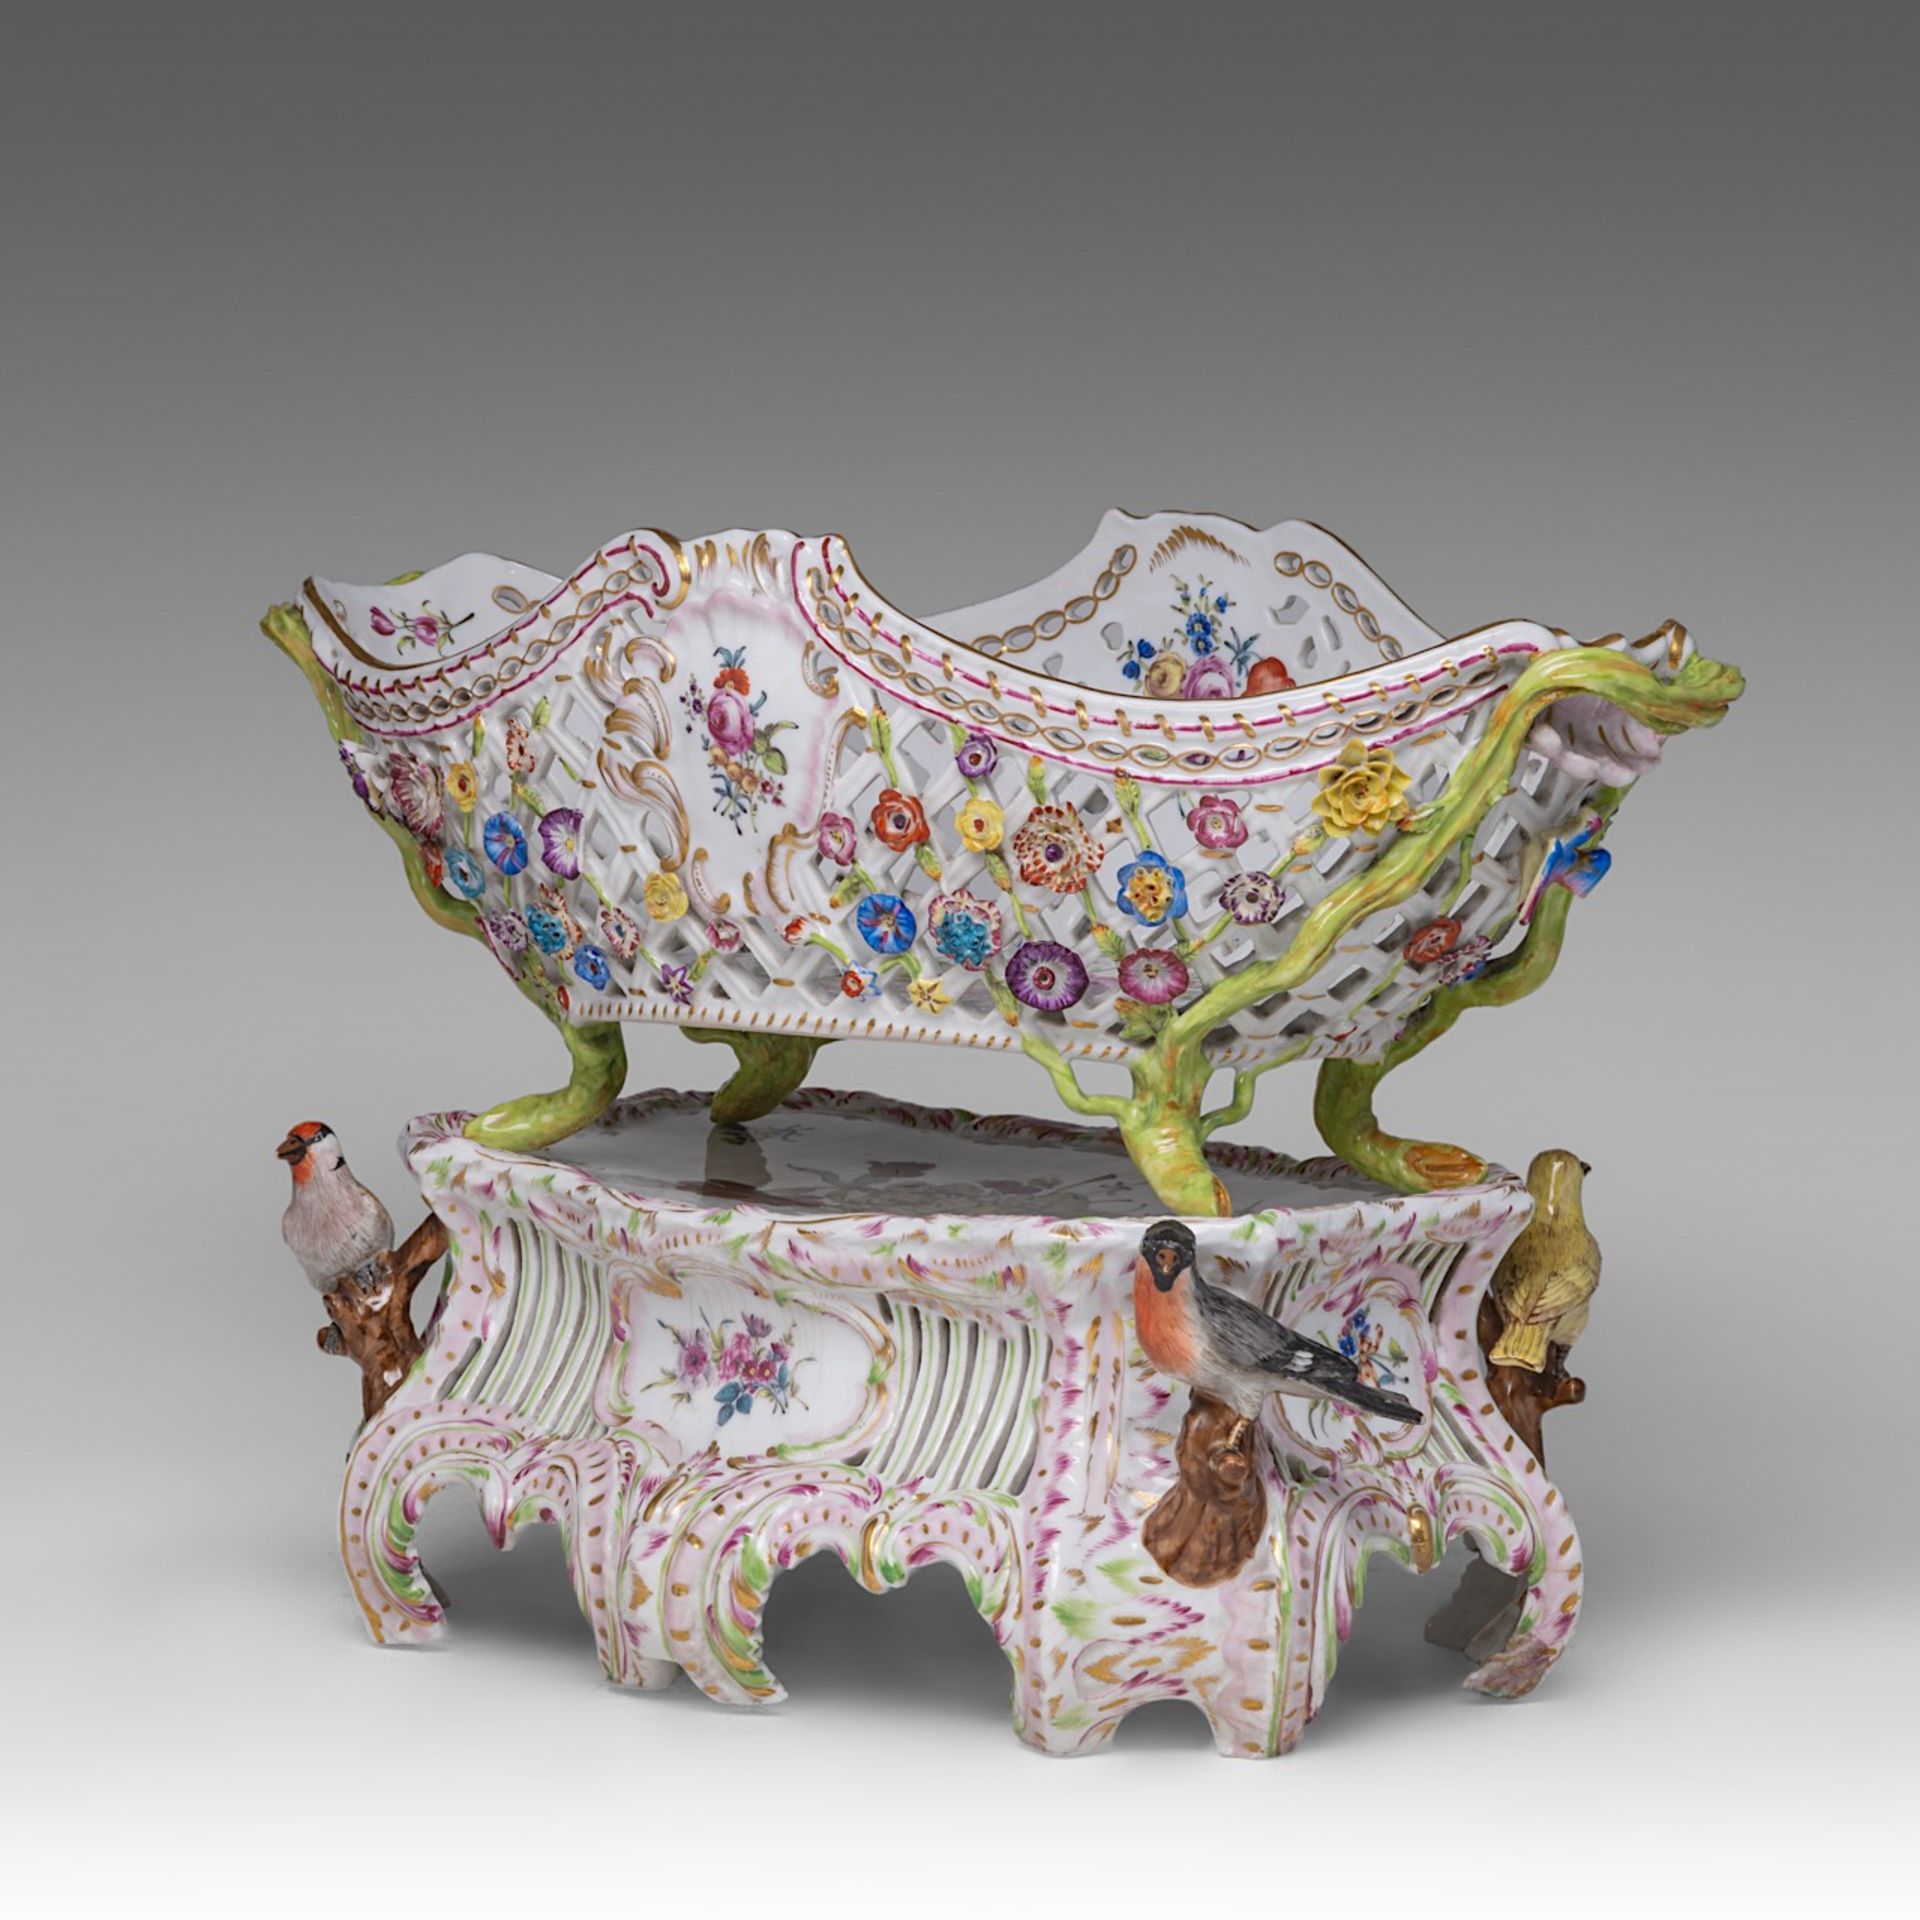 A polychrome Saxony porcelain basket on stand, decorated with modelled birds and flowers, H 33 - W 4 - Bild 2 aus 12